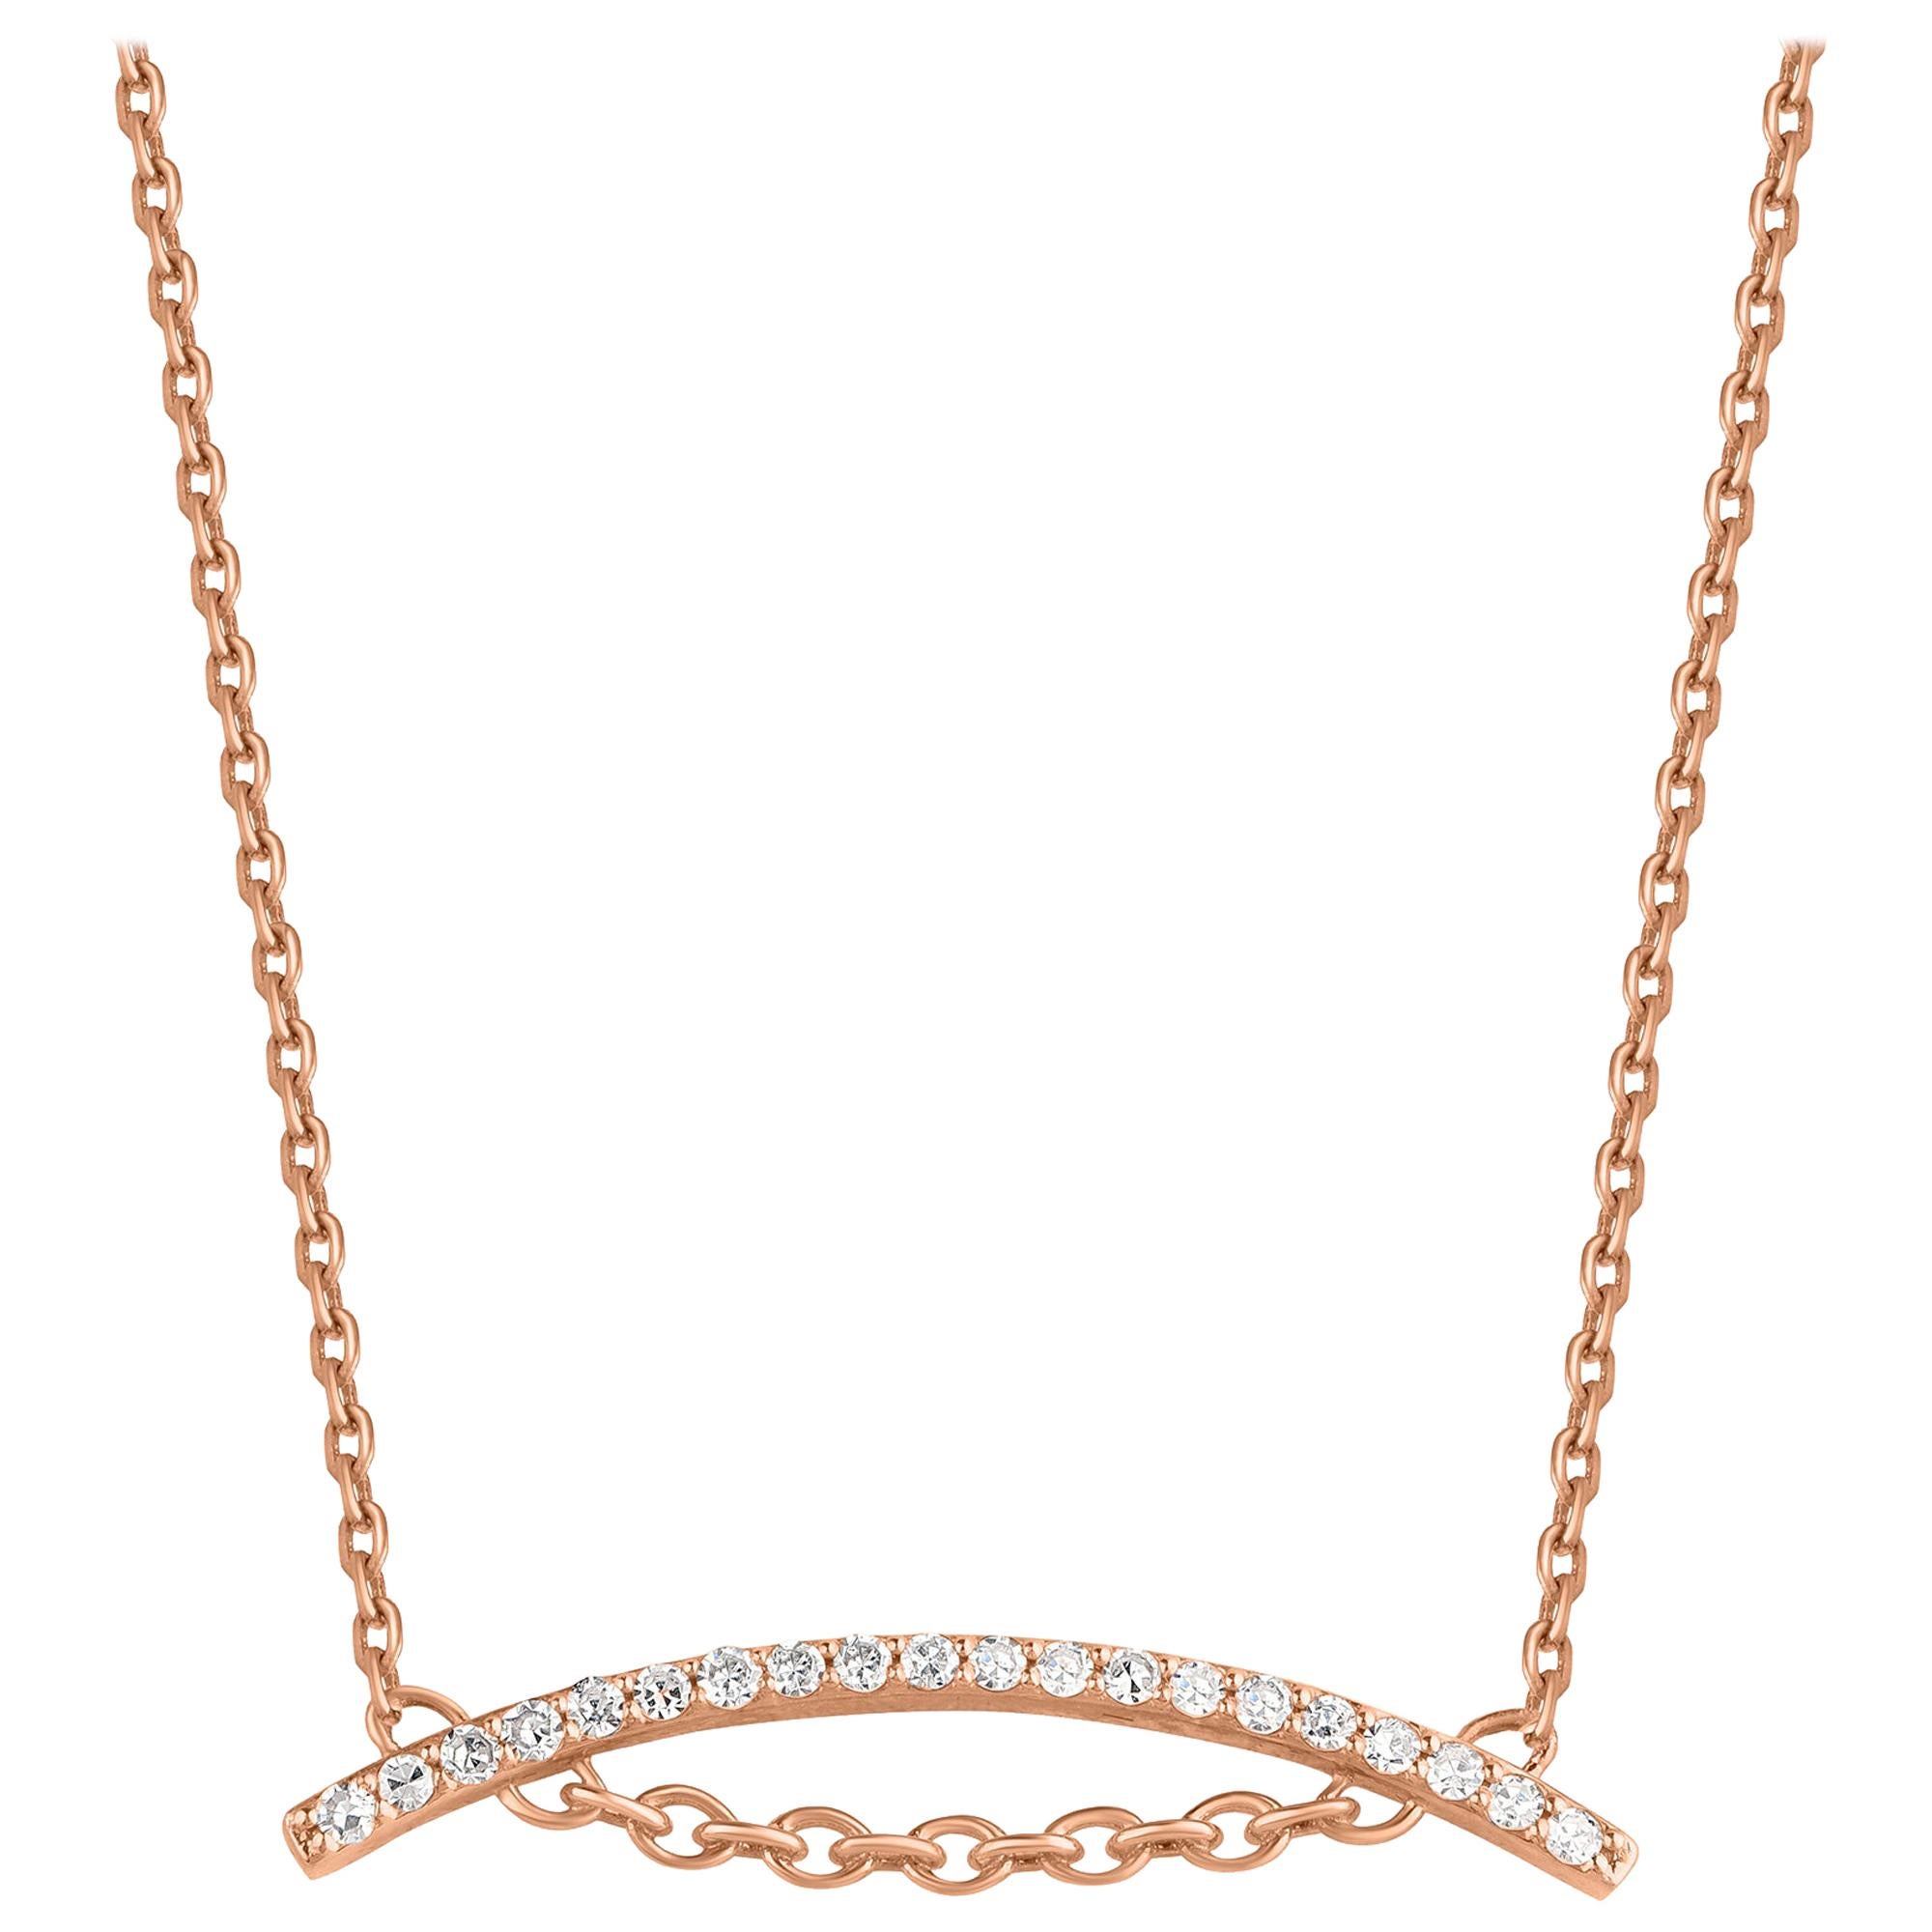 TJD 0.20 Carat Diamond 18 Karat Rose Gold Curved Bar Necklace with 18 inch Chain For Sale